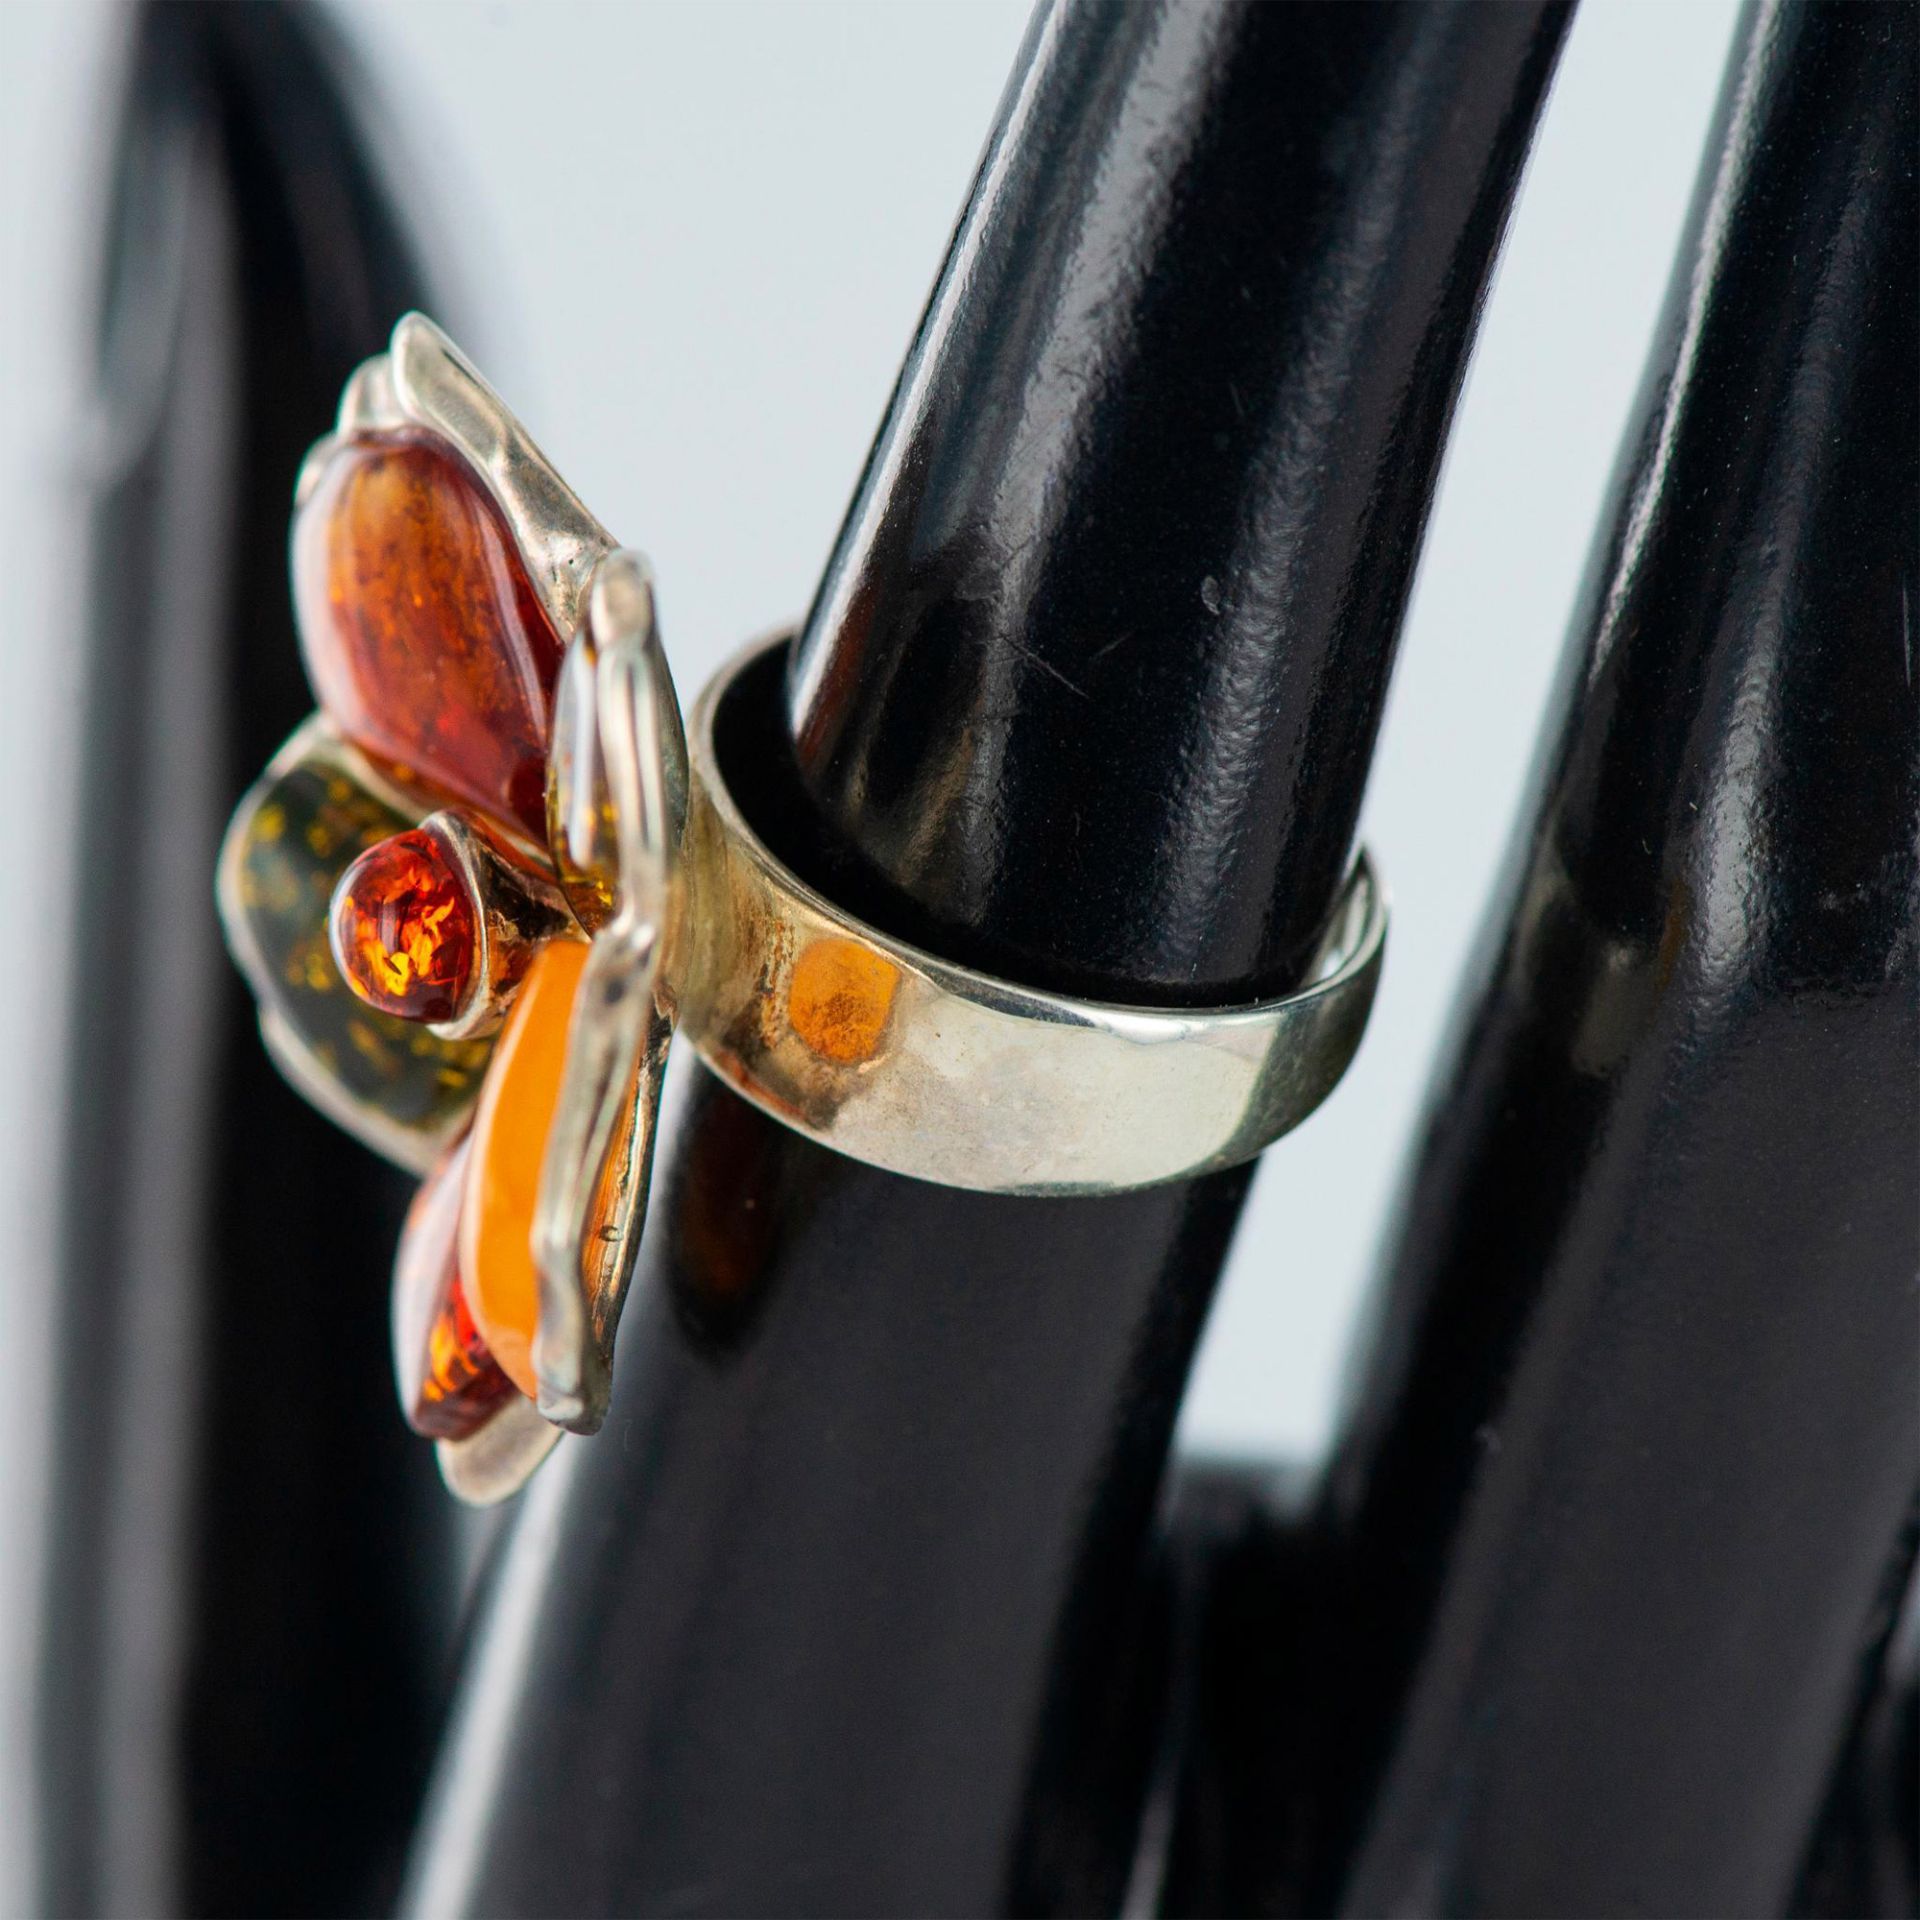 Sterling Silver and Amber Flower Ring - Image 2 of 6